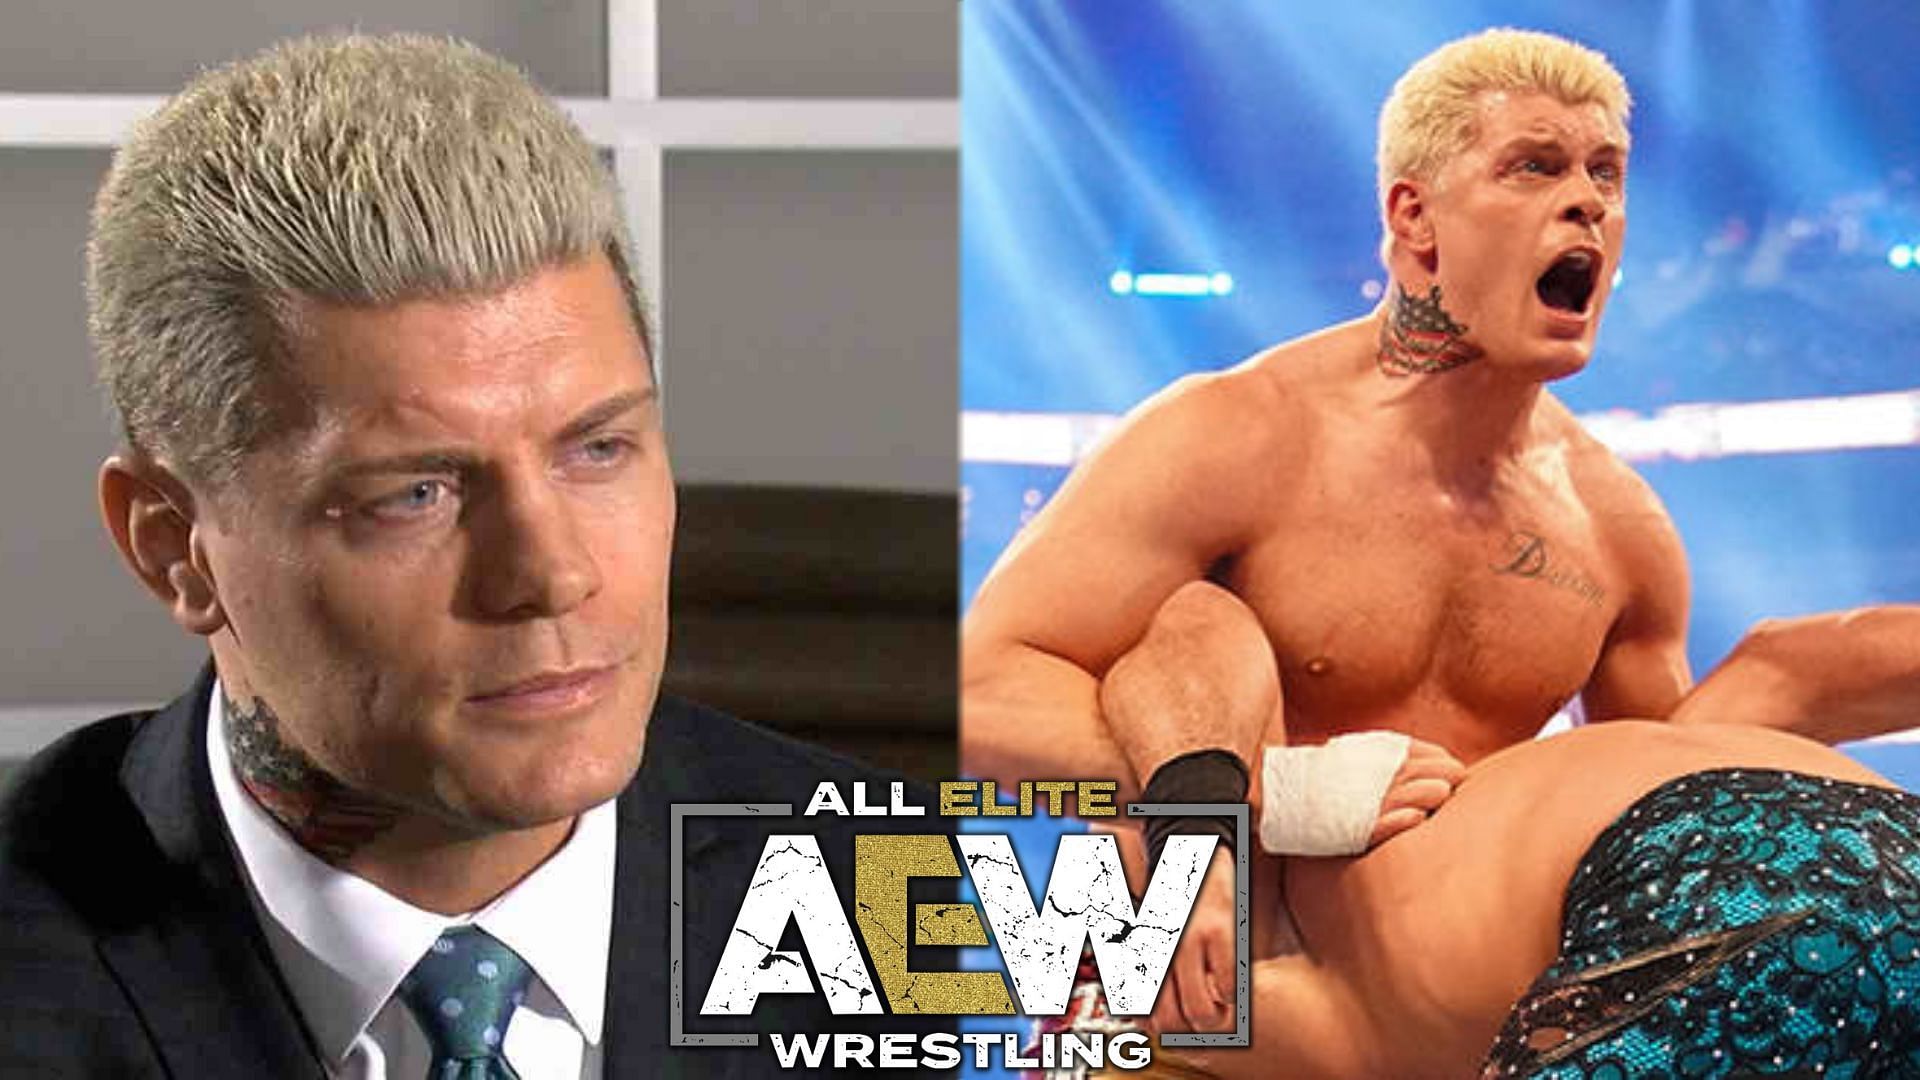 Cody Rhodes has been involved in some of the most emotionally charged feuds in the industry.